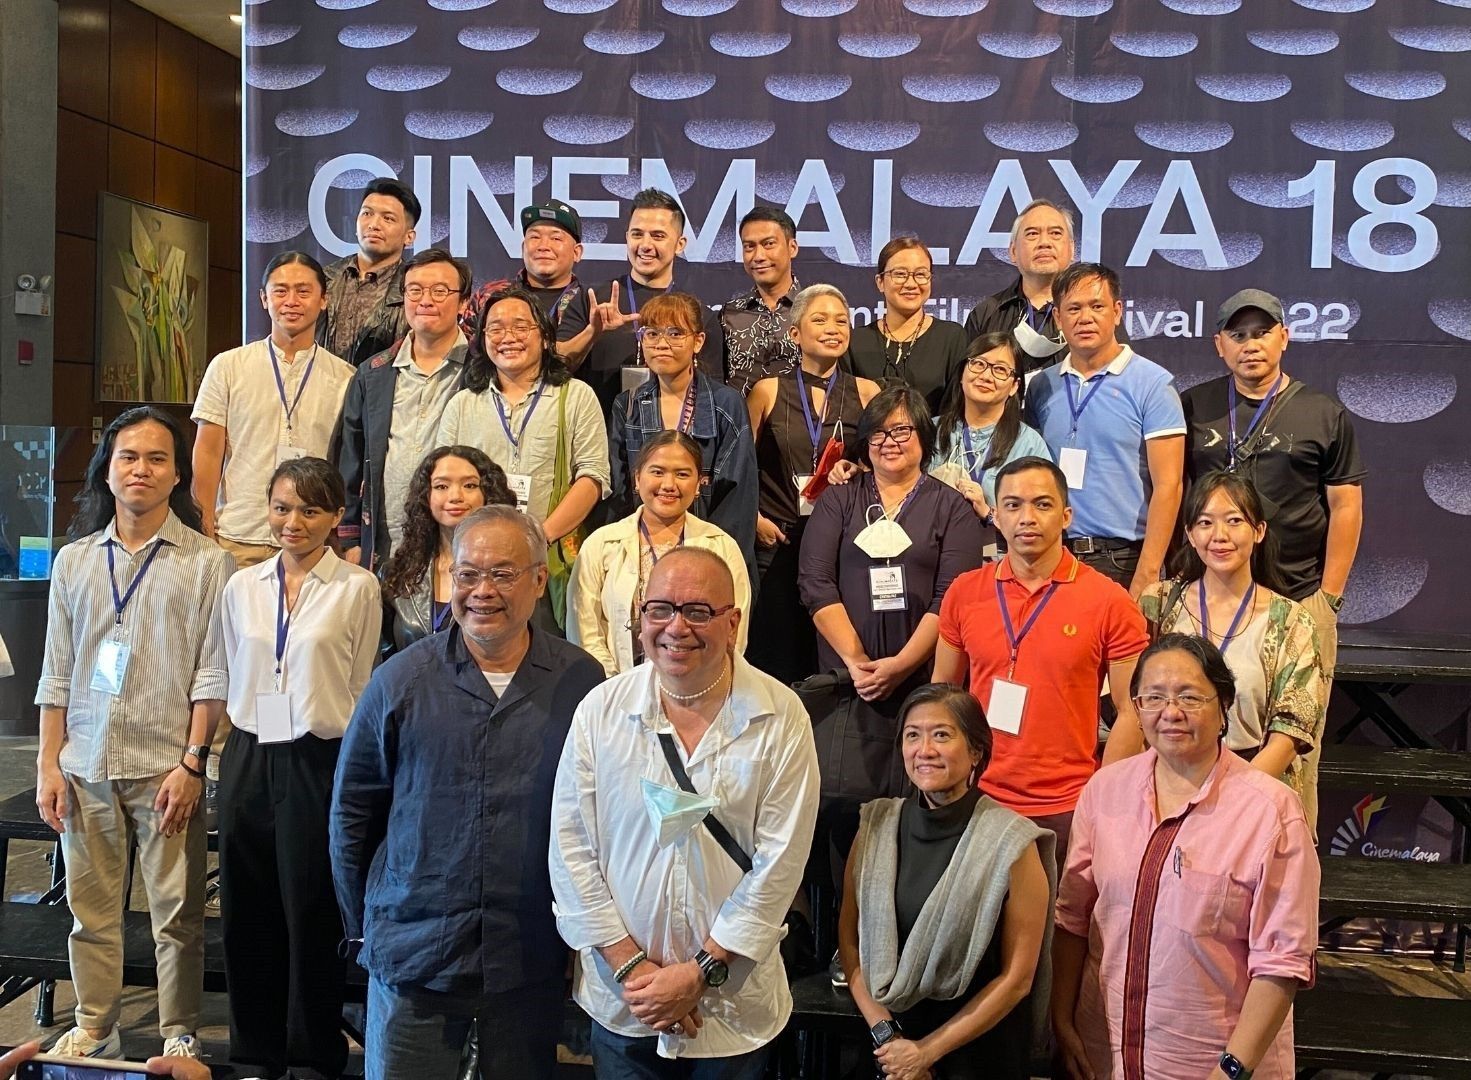 Cinemalaya returns to in-person screenings for 2022 edition